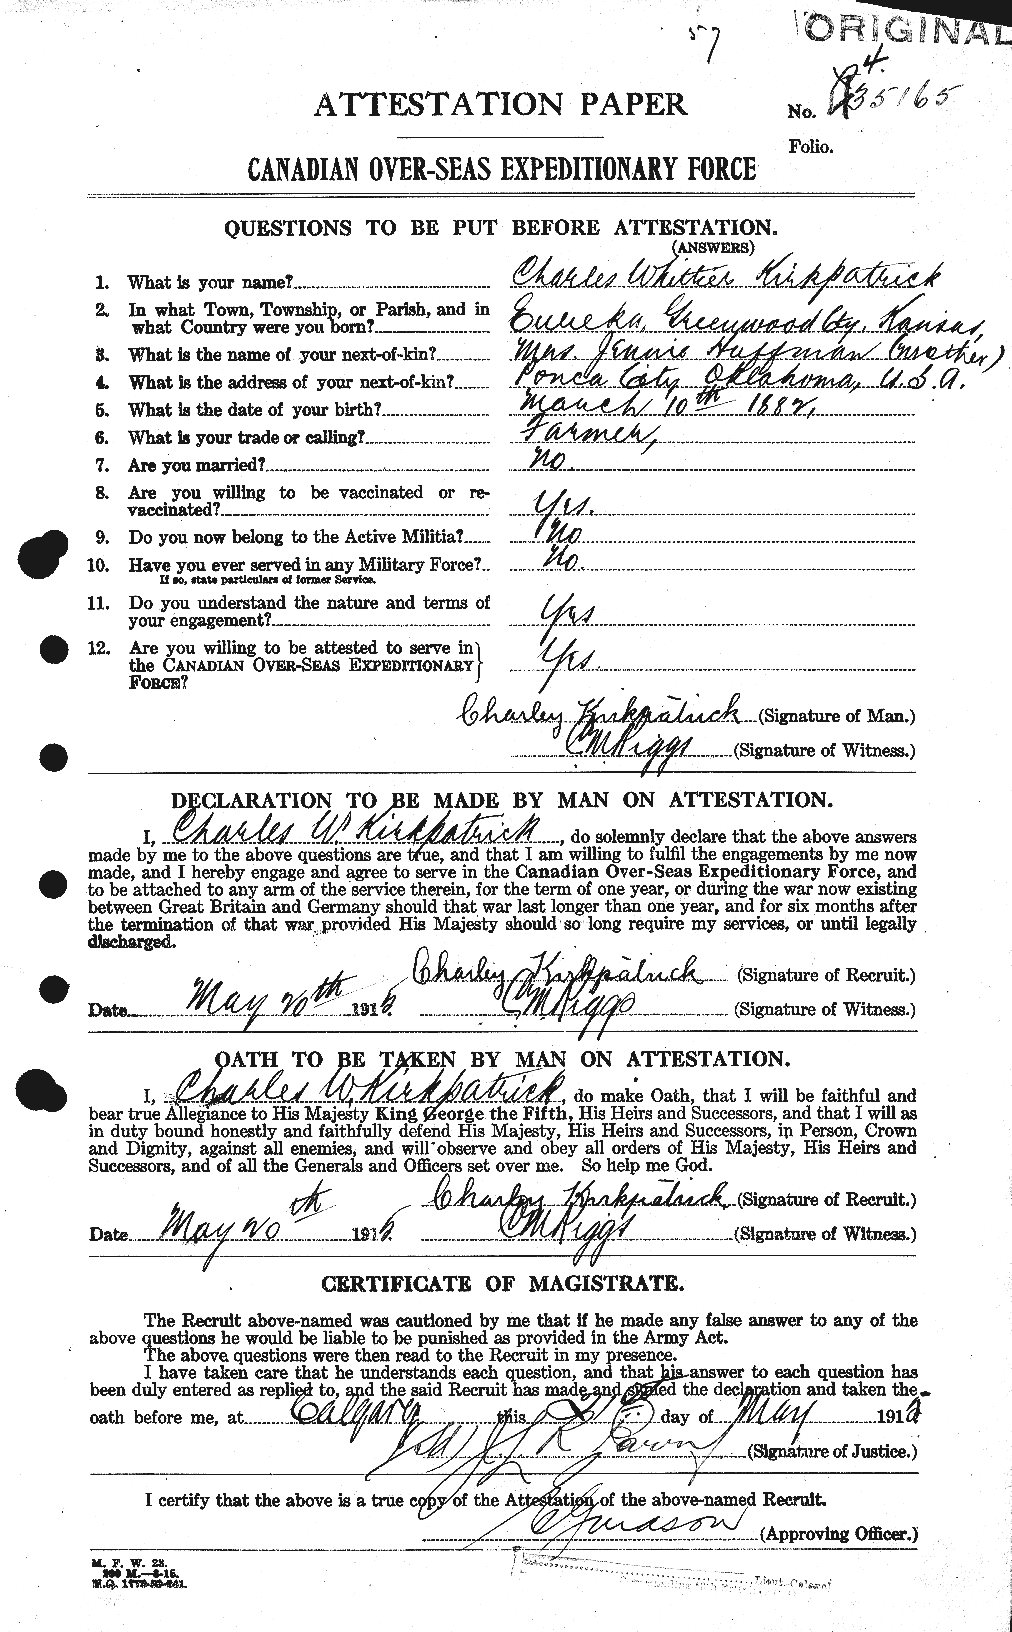 Personnel Records of the First World War - CEF 436034a